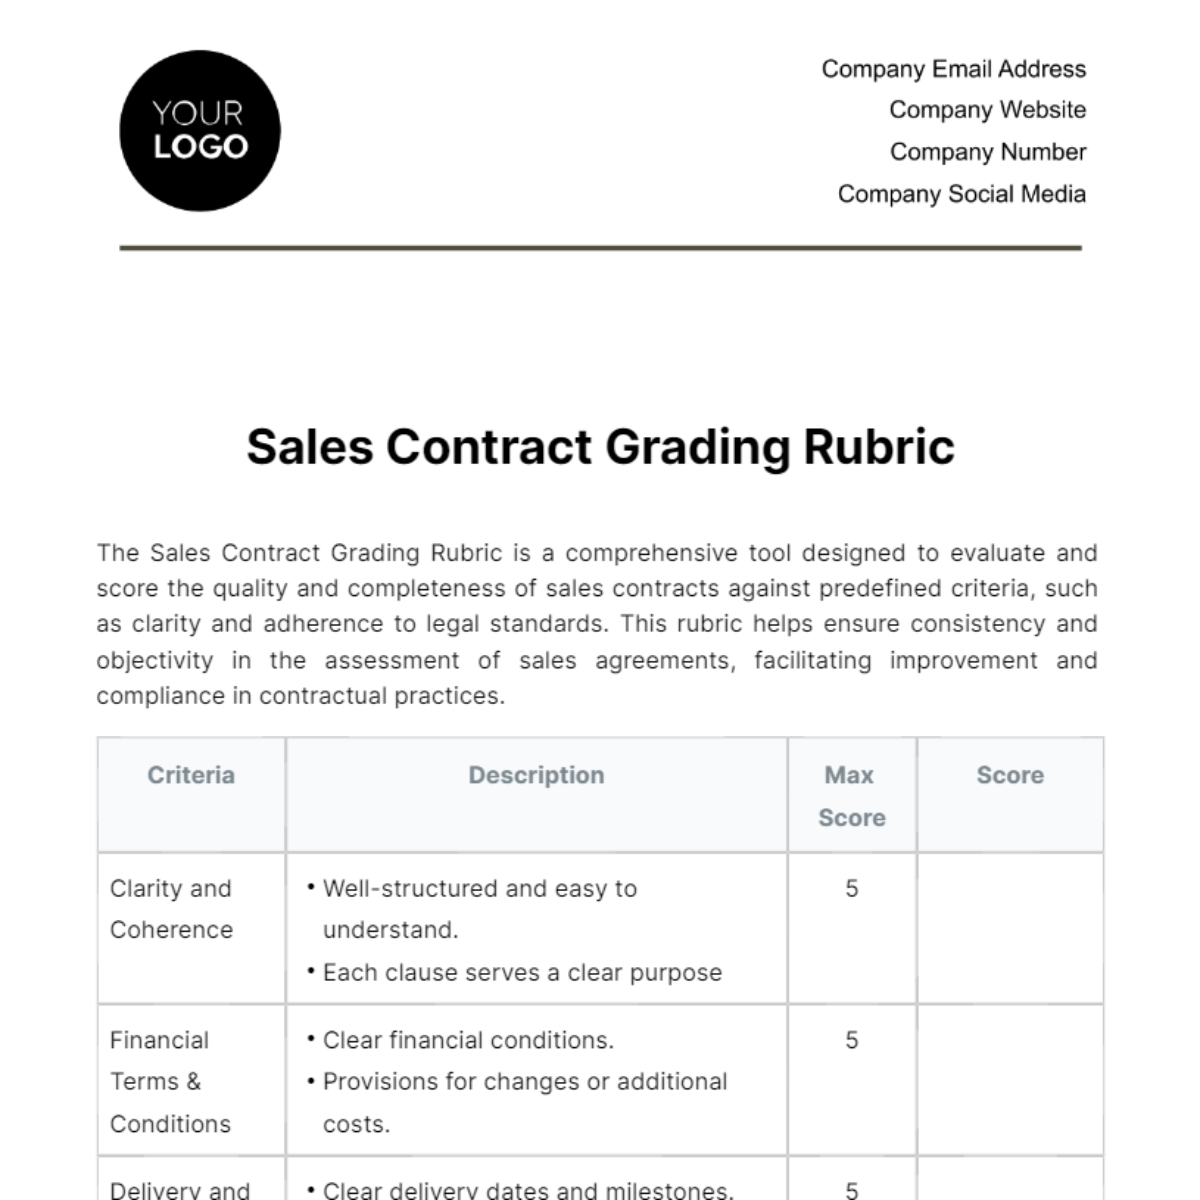 Sales Contract Grading Rubric Template